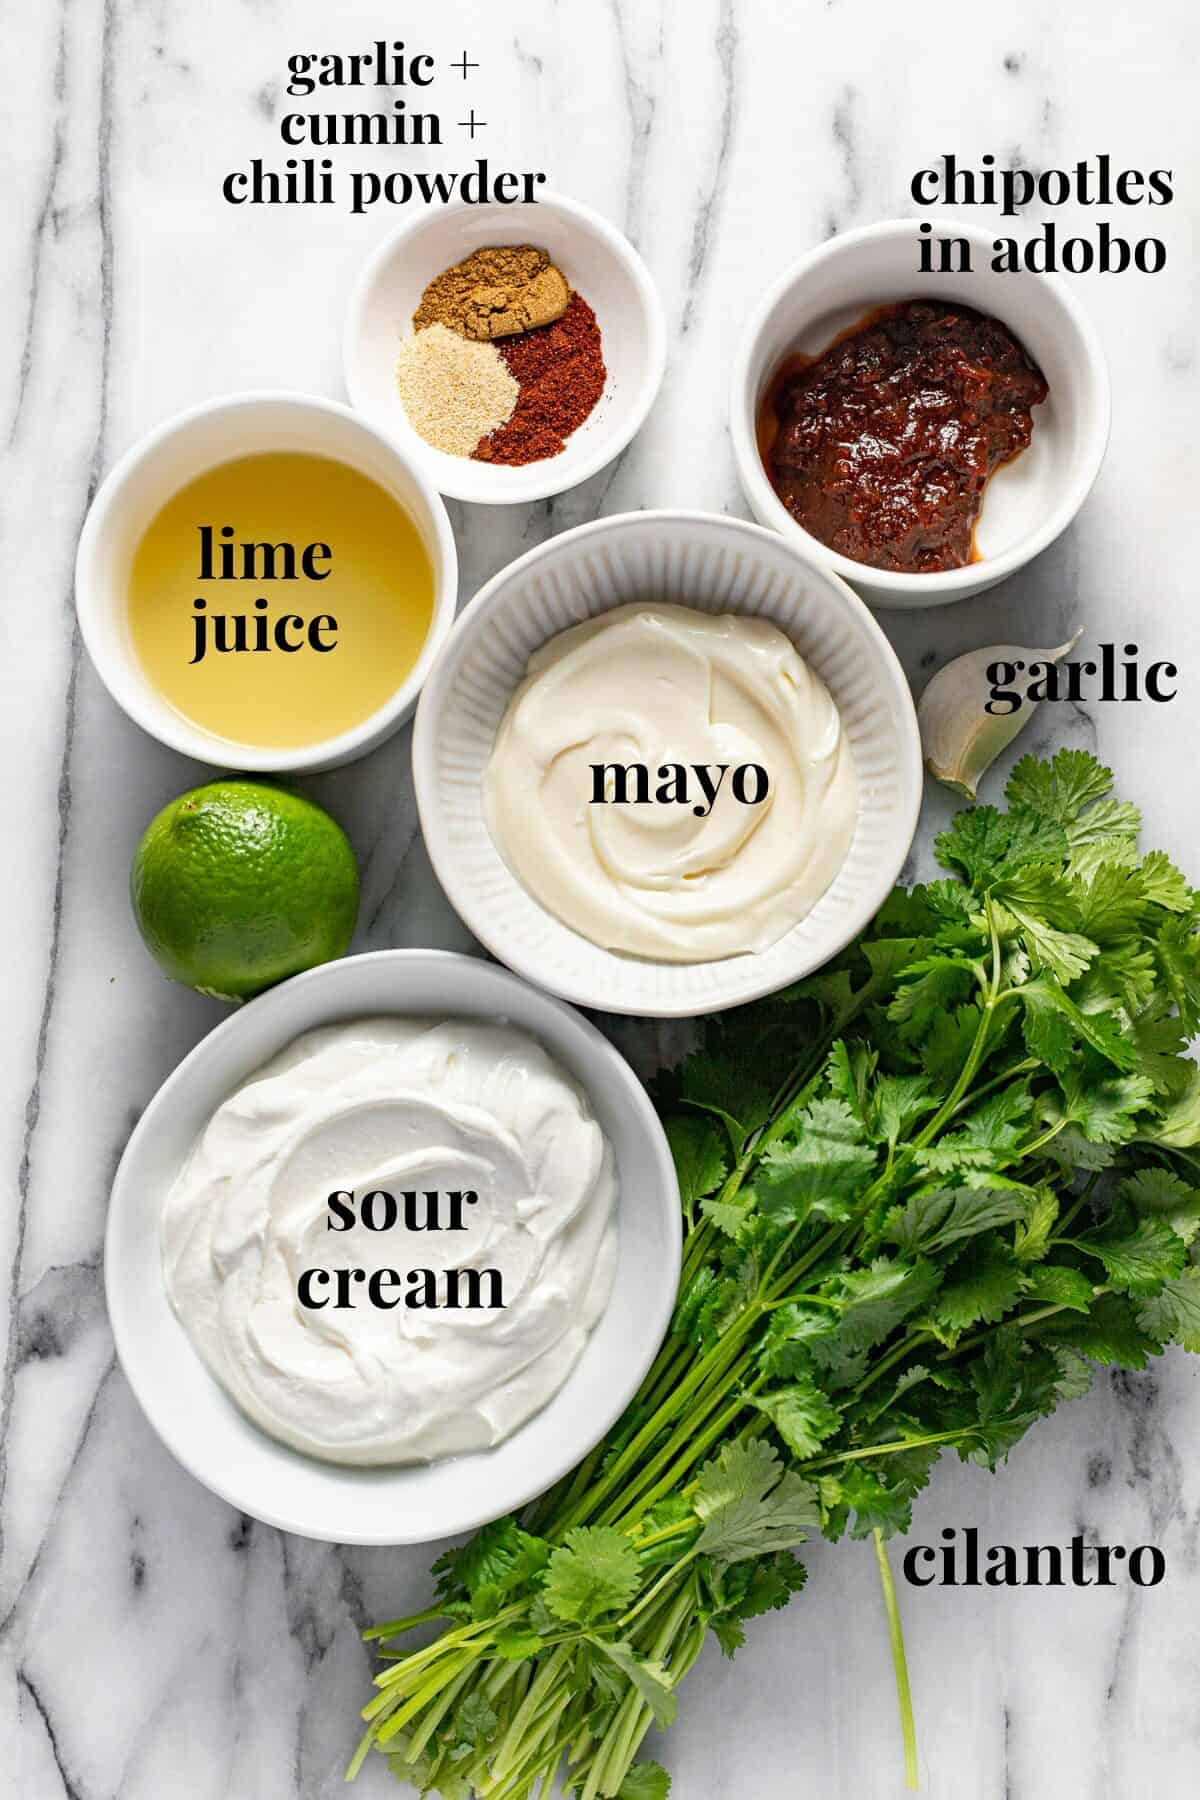 White marble counter top with bowls of ingredients to make chipotle sauce.